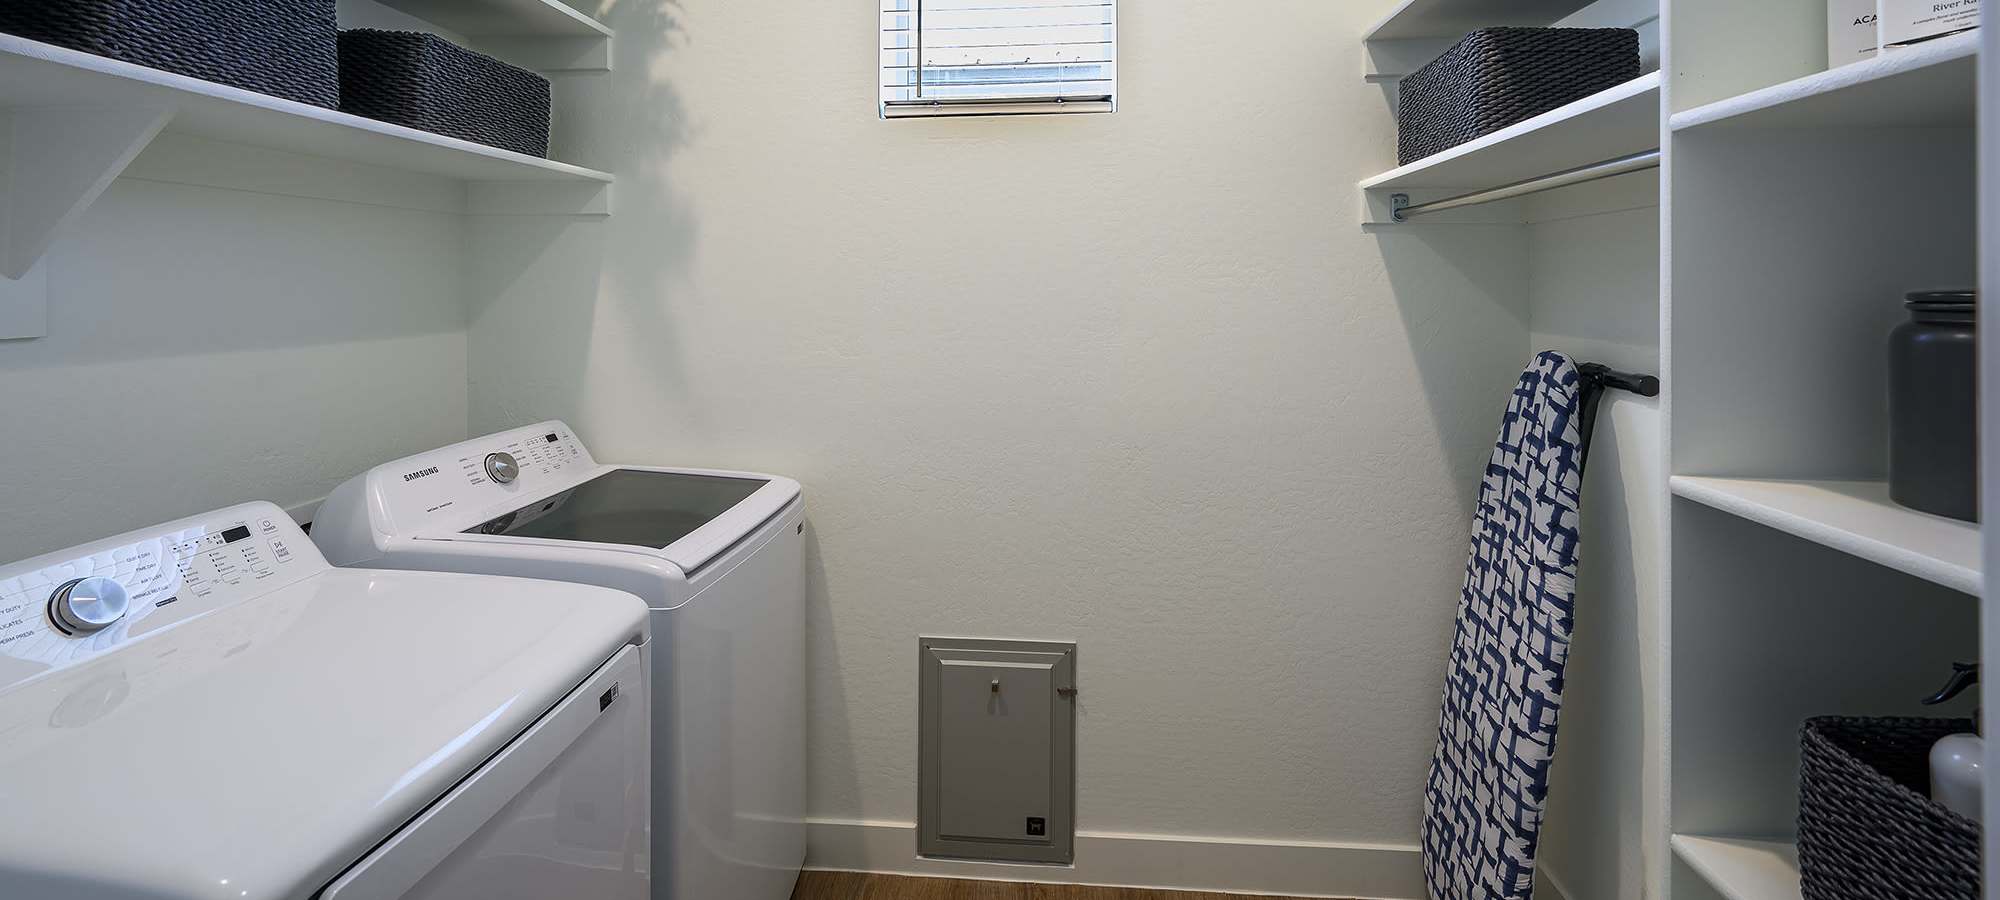 Spacious Laundry Room with Doggy Door at FirstStreet Ballpark Village in Goodyear, Arizona